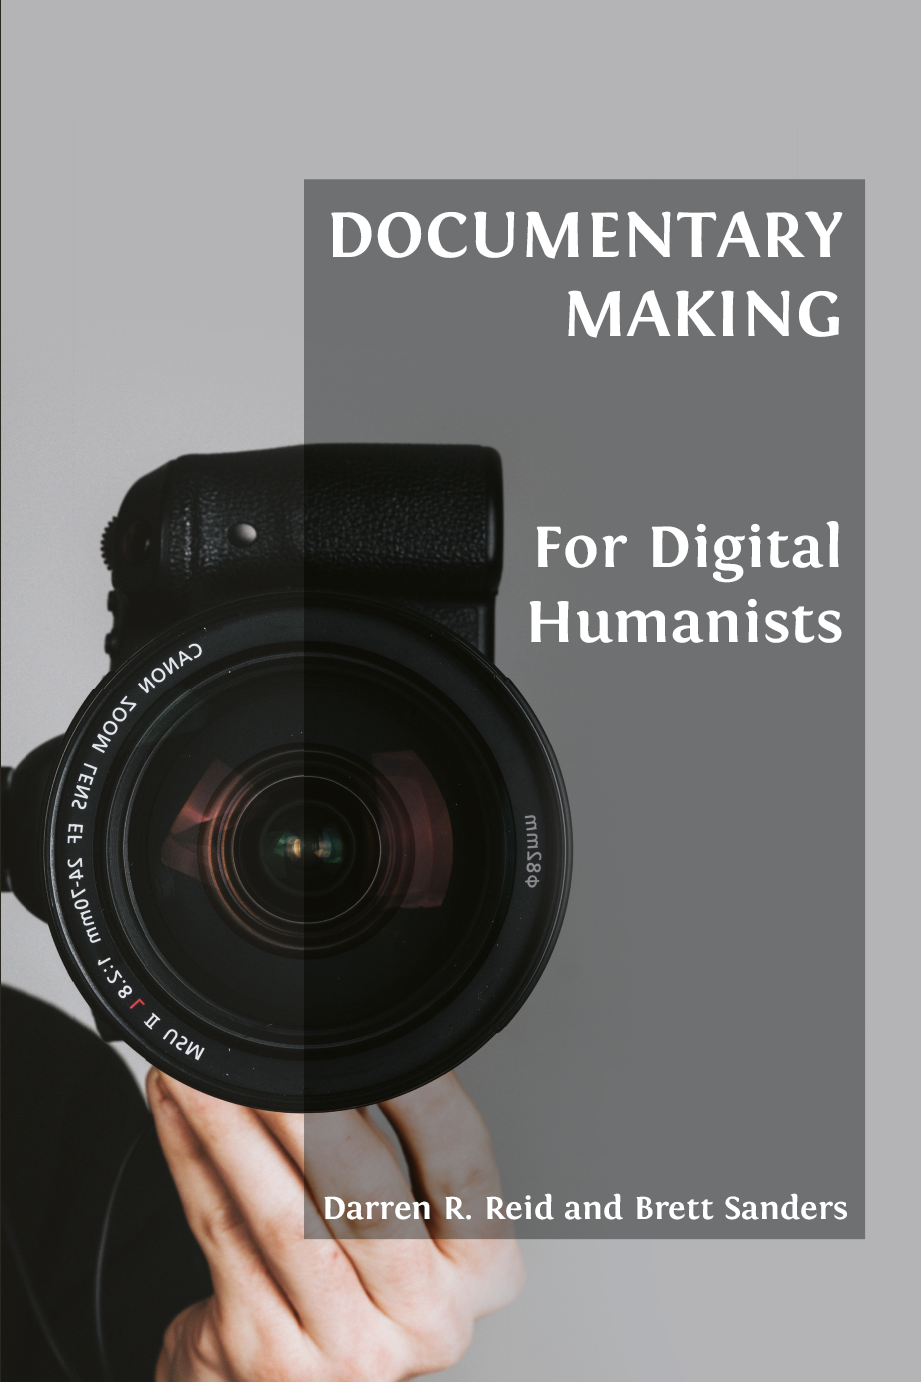 Documentary Making for Digital Humanists book cover image